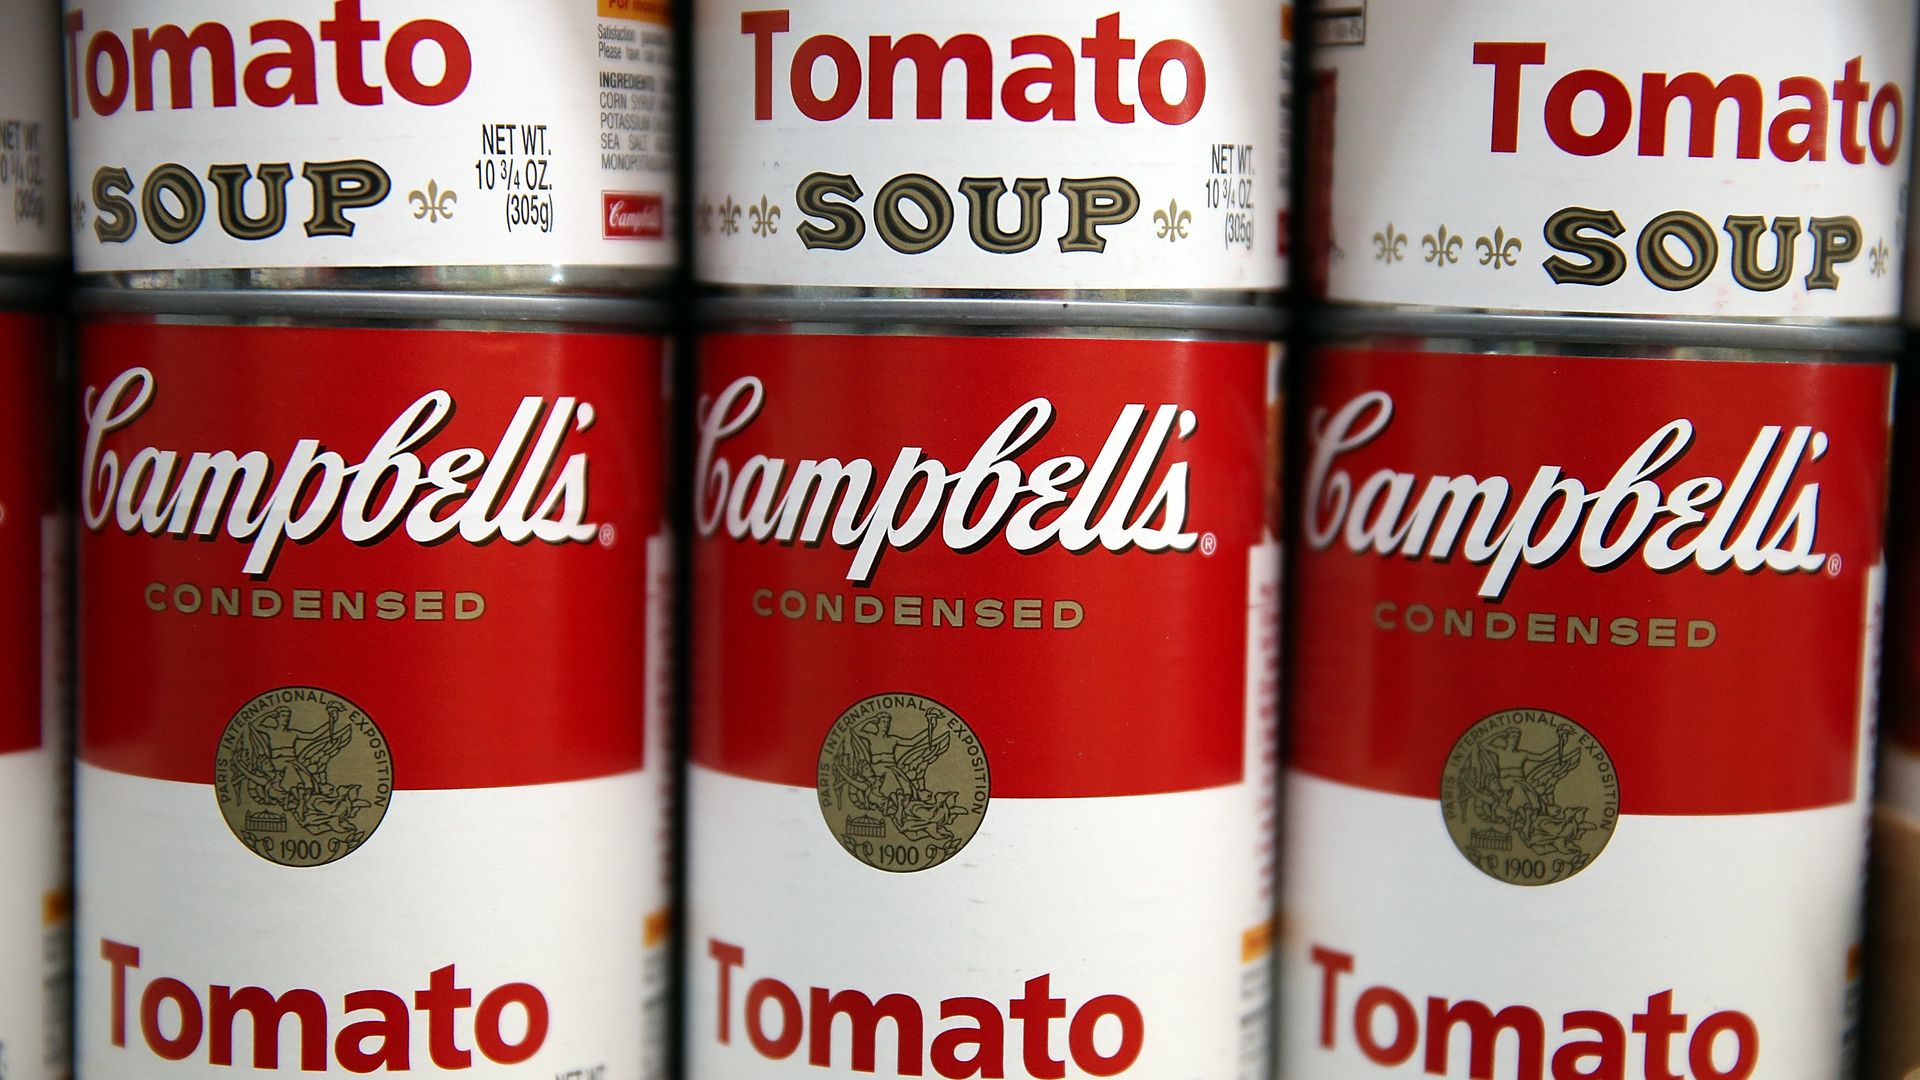 Cans of Campbell's Soup.